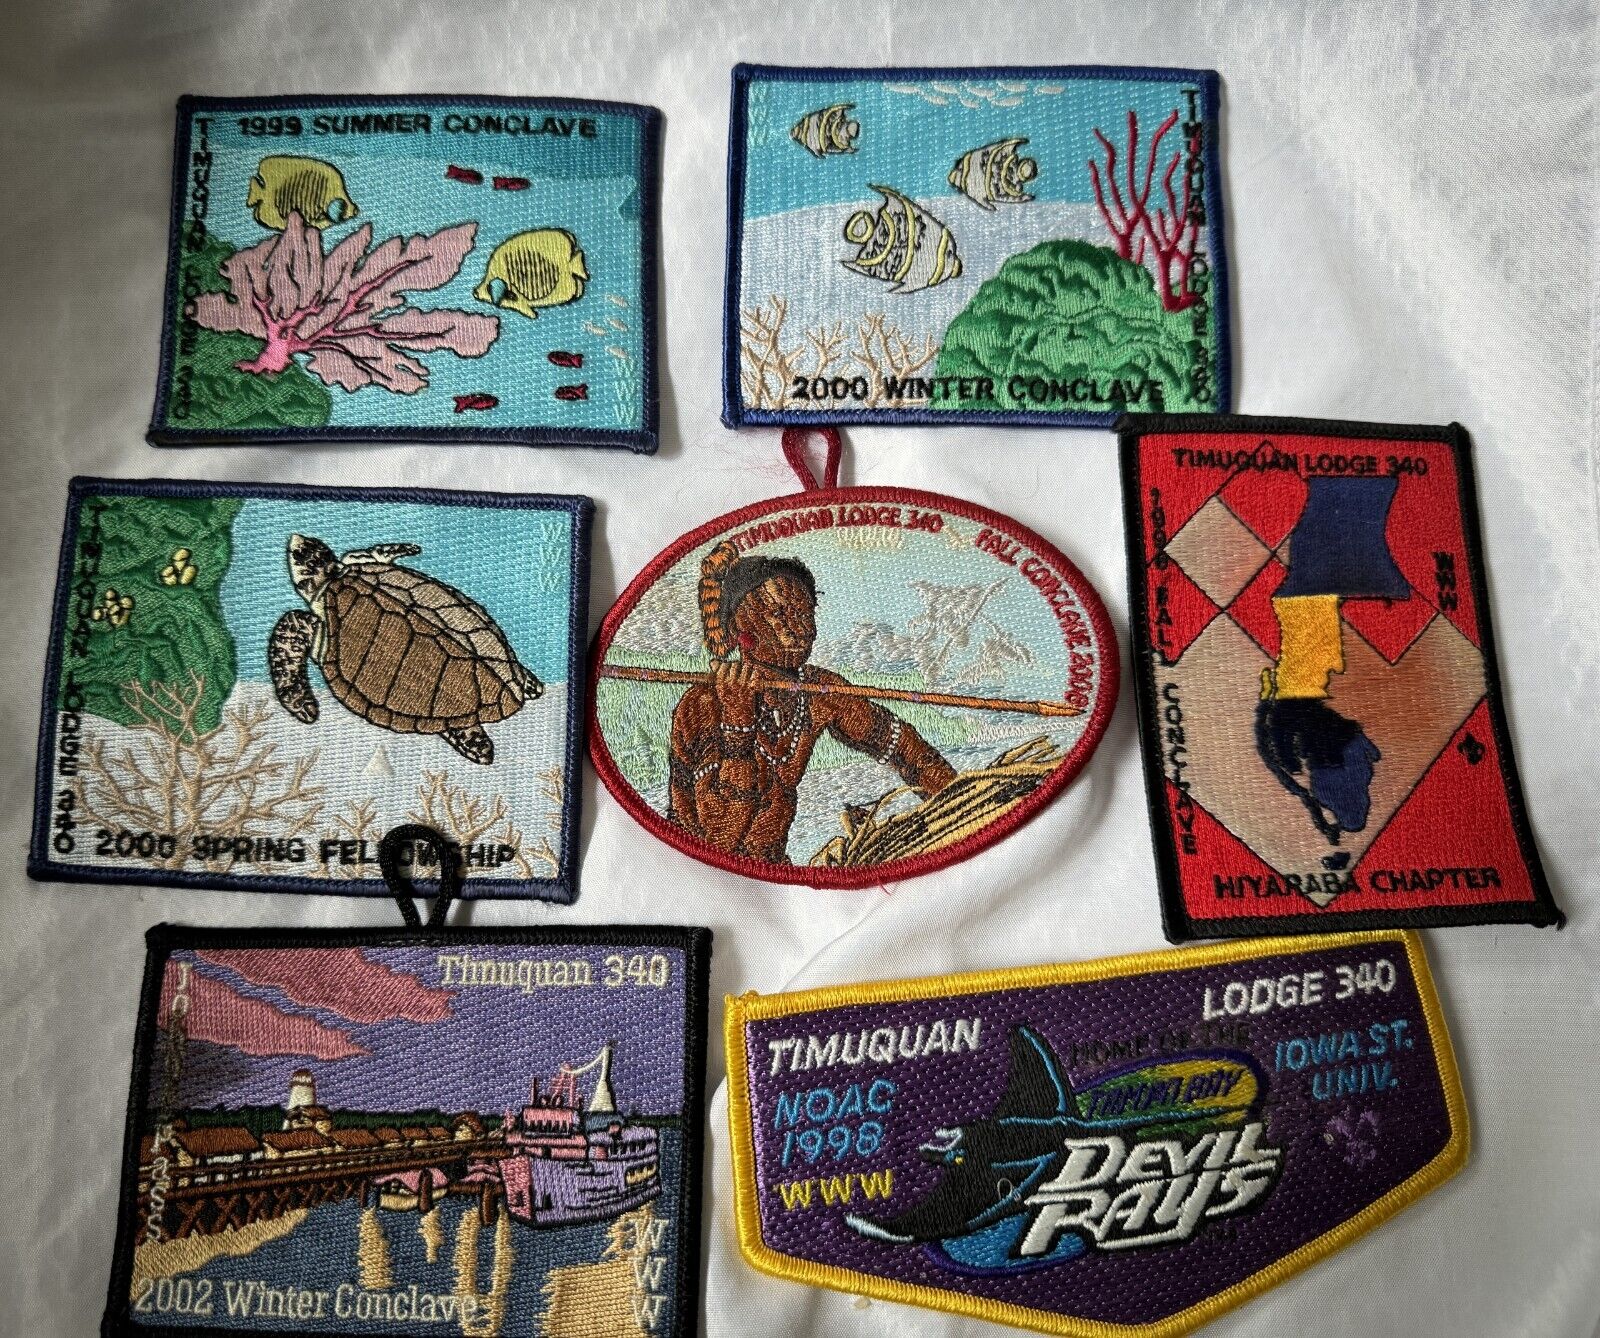 Lot of 7 Timuquan Lodge 340 Boy Scouts BSA Patches - A